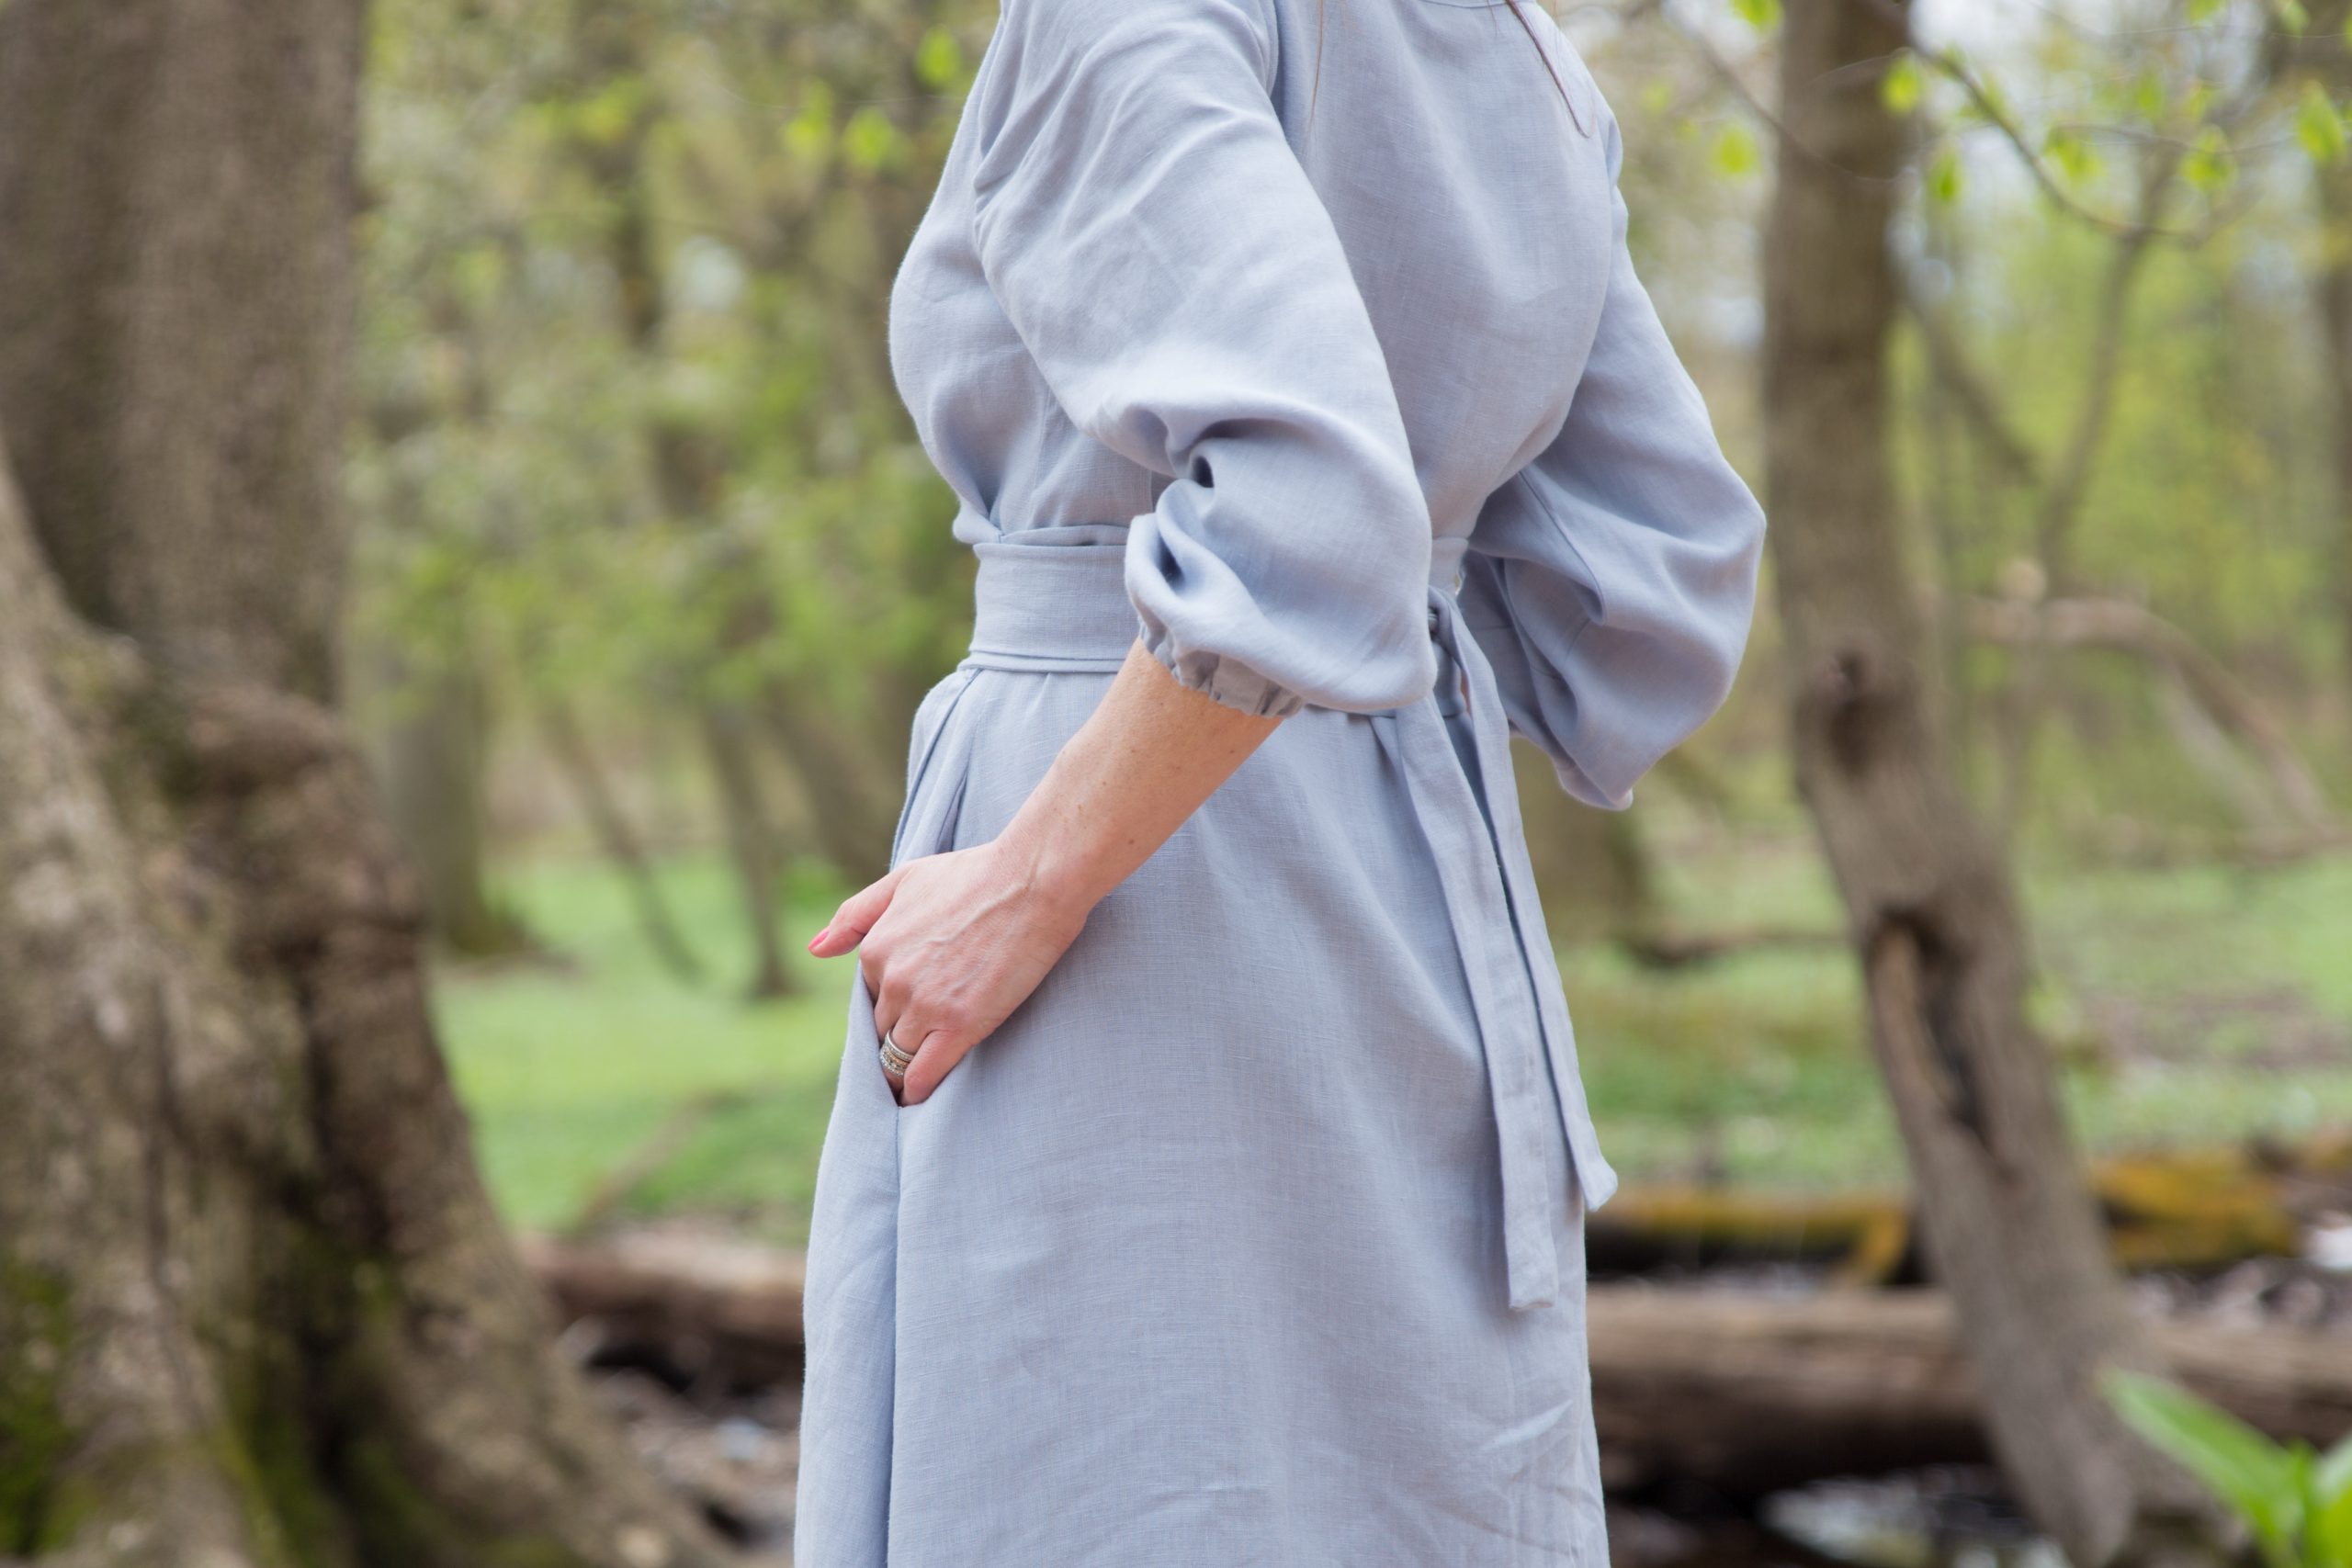 luxury-sustainable-brand-french-luxe-provence-linen-pale-blue-wrap-maxi-dress